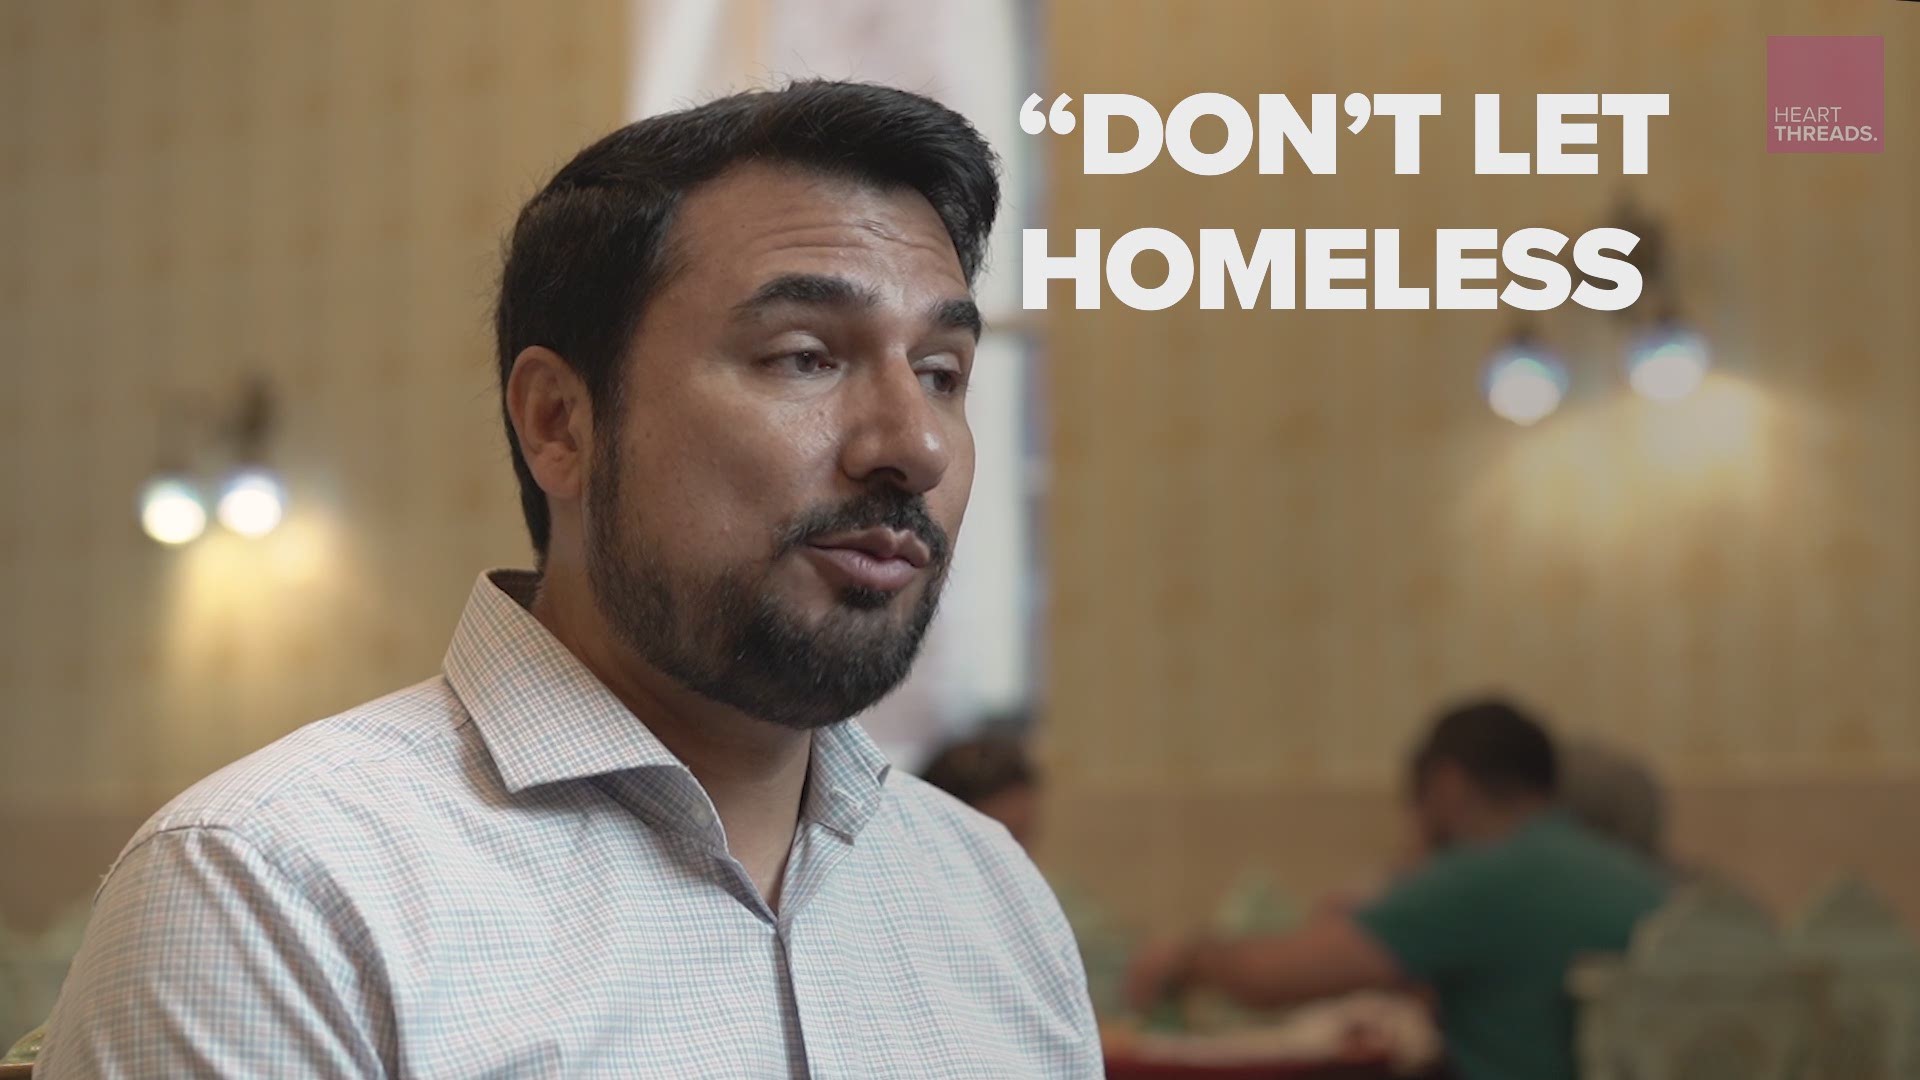 From poverty in Pakistan to prosperity in America, Kazi opened his restaurant to the hungry, both paying and non-paying customers alike. Today, he has fed thousands of those in need. It's all about keeping his mother's tradition alive.